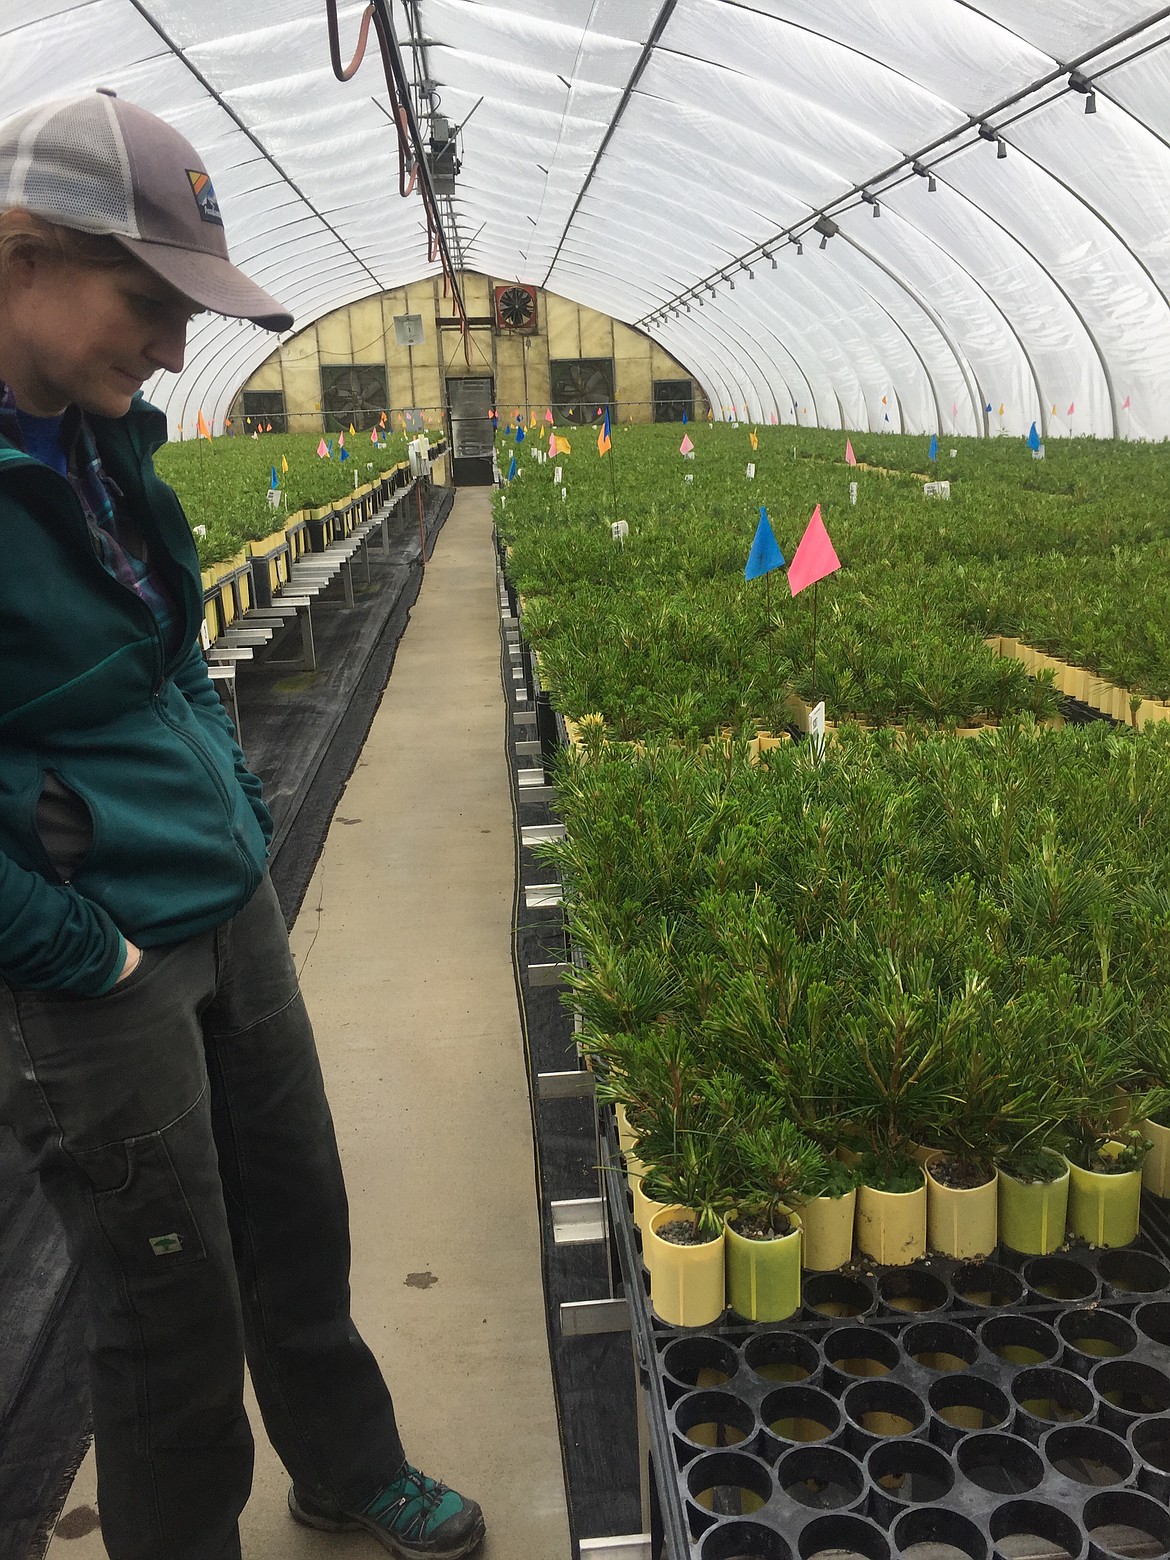 Emily Rhoades, horticulturist and greenhouse manager, examines whitebark pine seedlings at the Coeur d'Alene Forest Service nursery. The conifer requires an extra year of care before being transported to regional forest service districts for reforestation planting. (JENNIFER PASSARO/ Press)